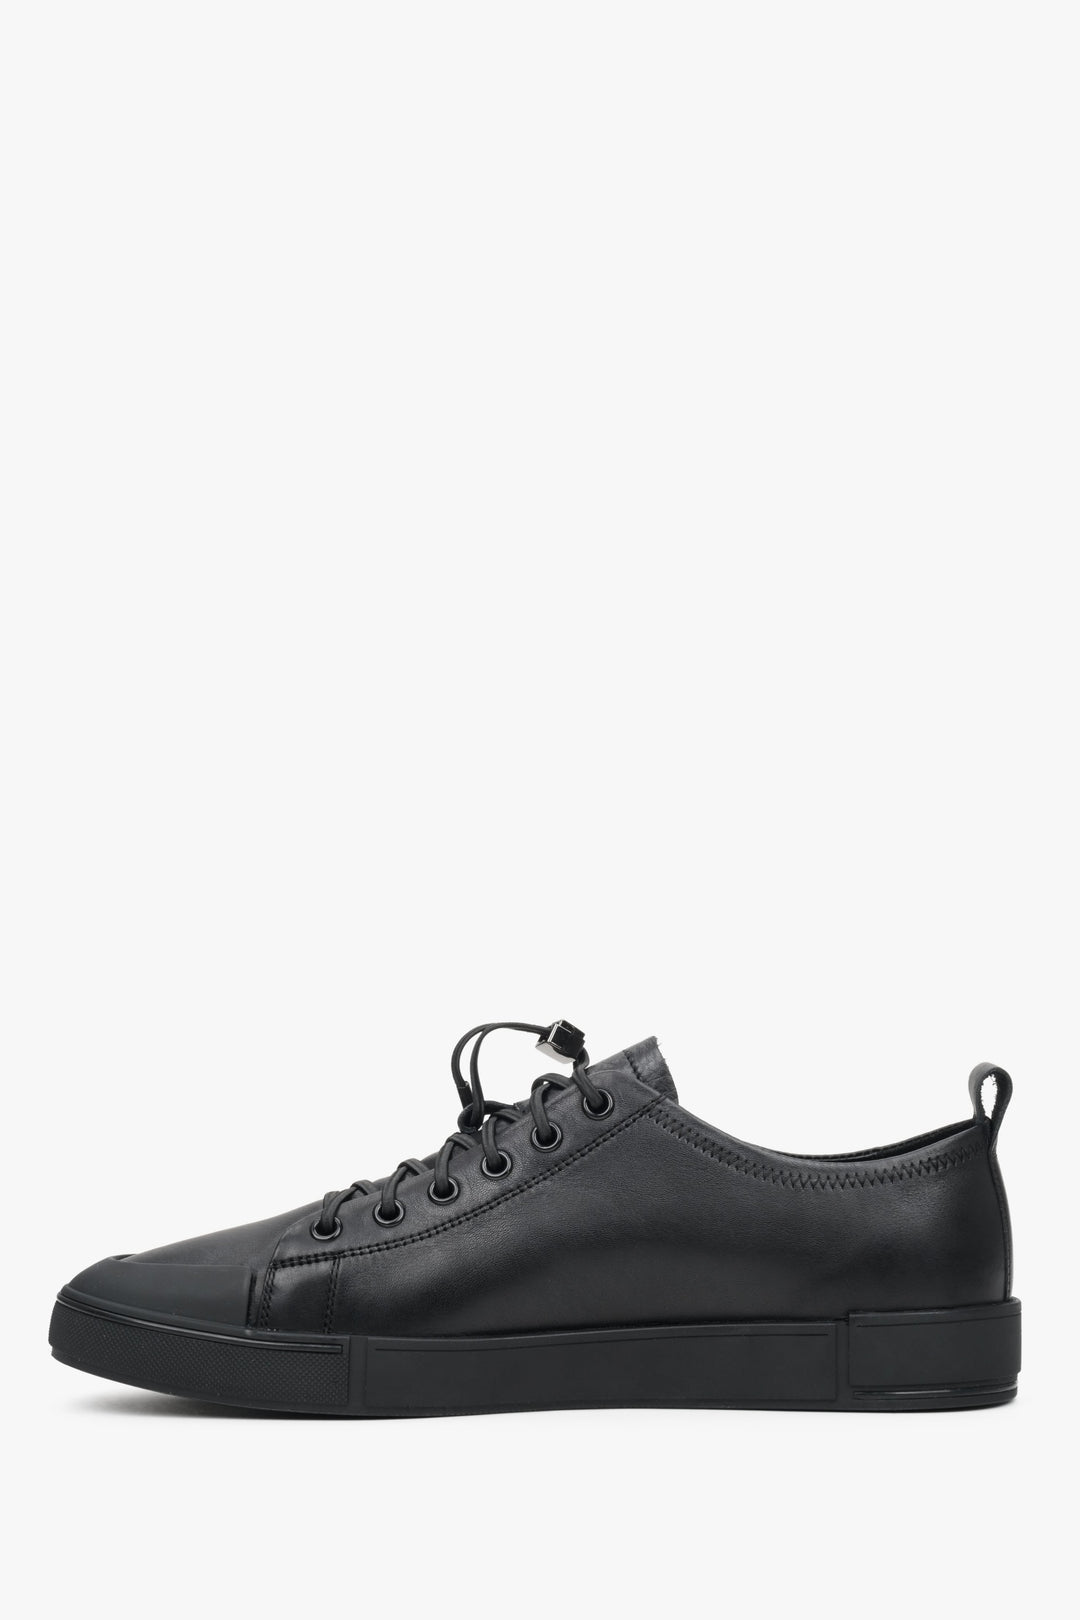 Men's black leather sneakers by Estro - shoe profile for fall.